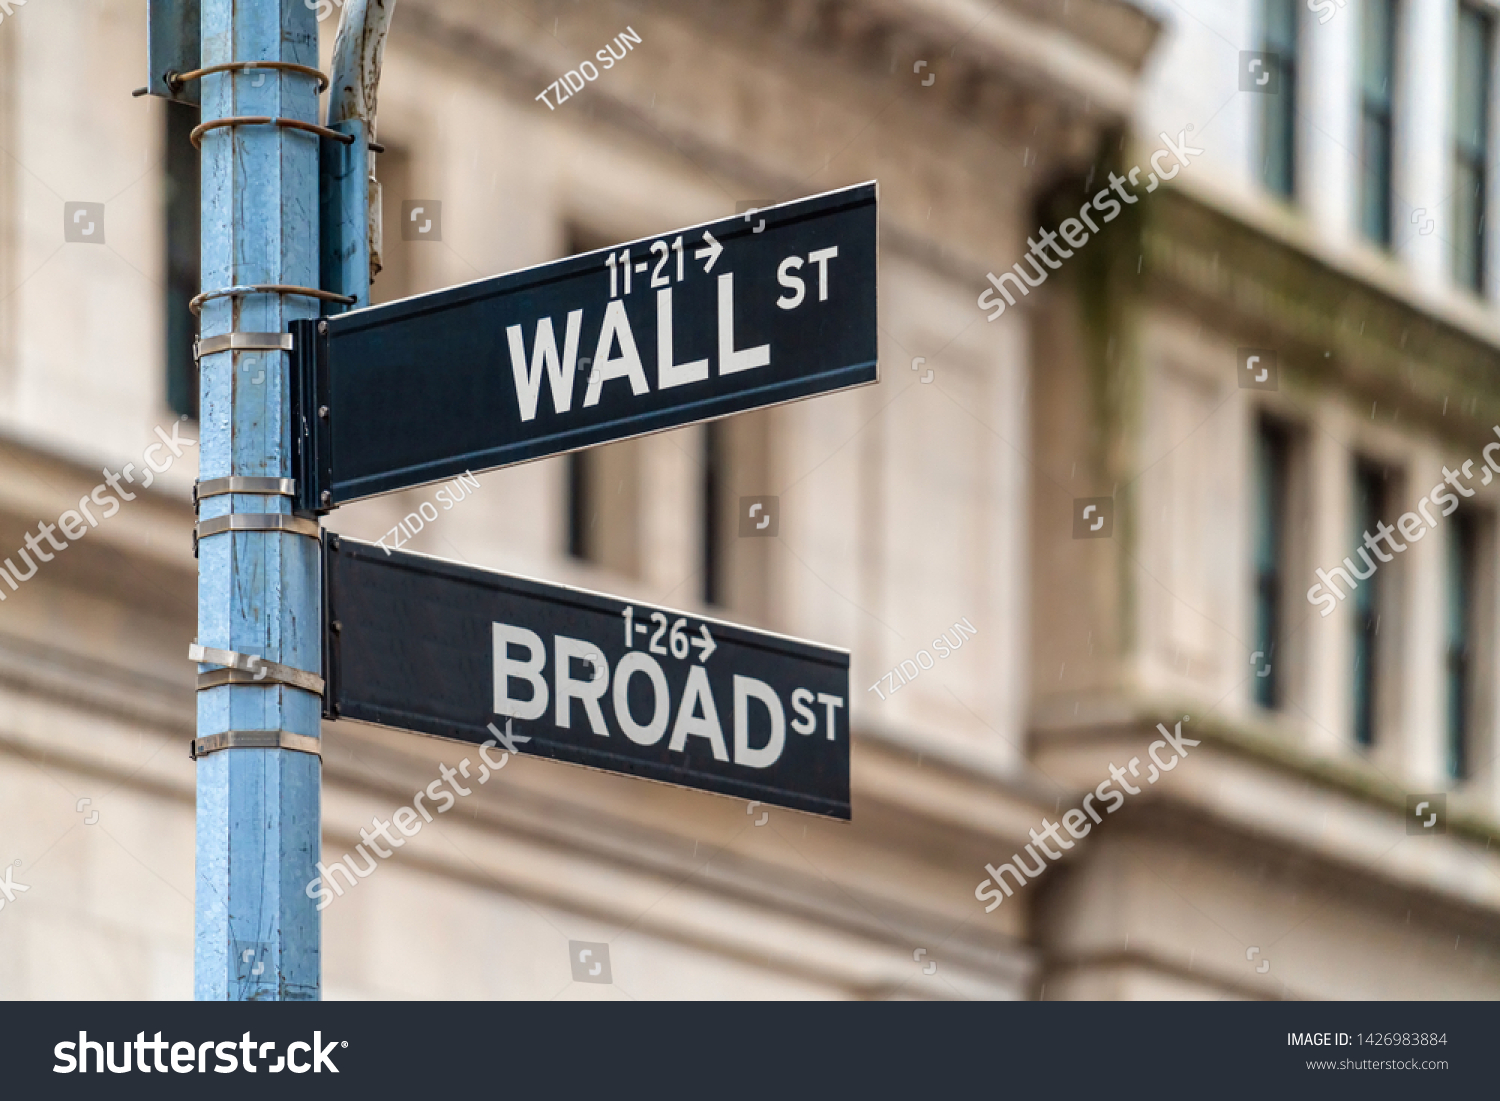 Wall Street "WALL ST" sign and broadway street over  NYSE stock market exchange building background. The New York Stock Exchange locate in economy district, Business and sing of landmark concept #1426983884